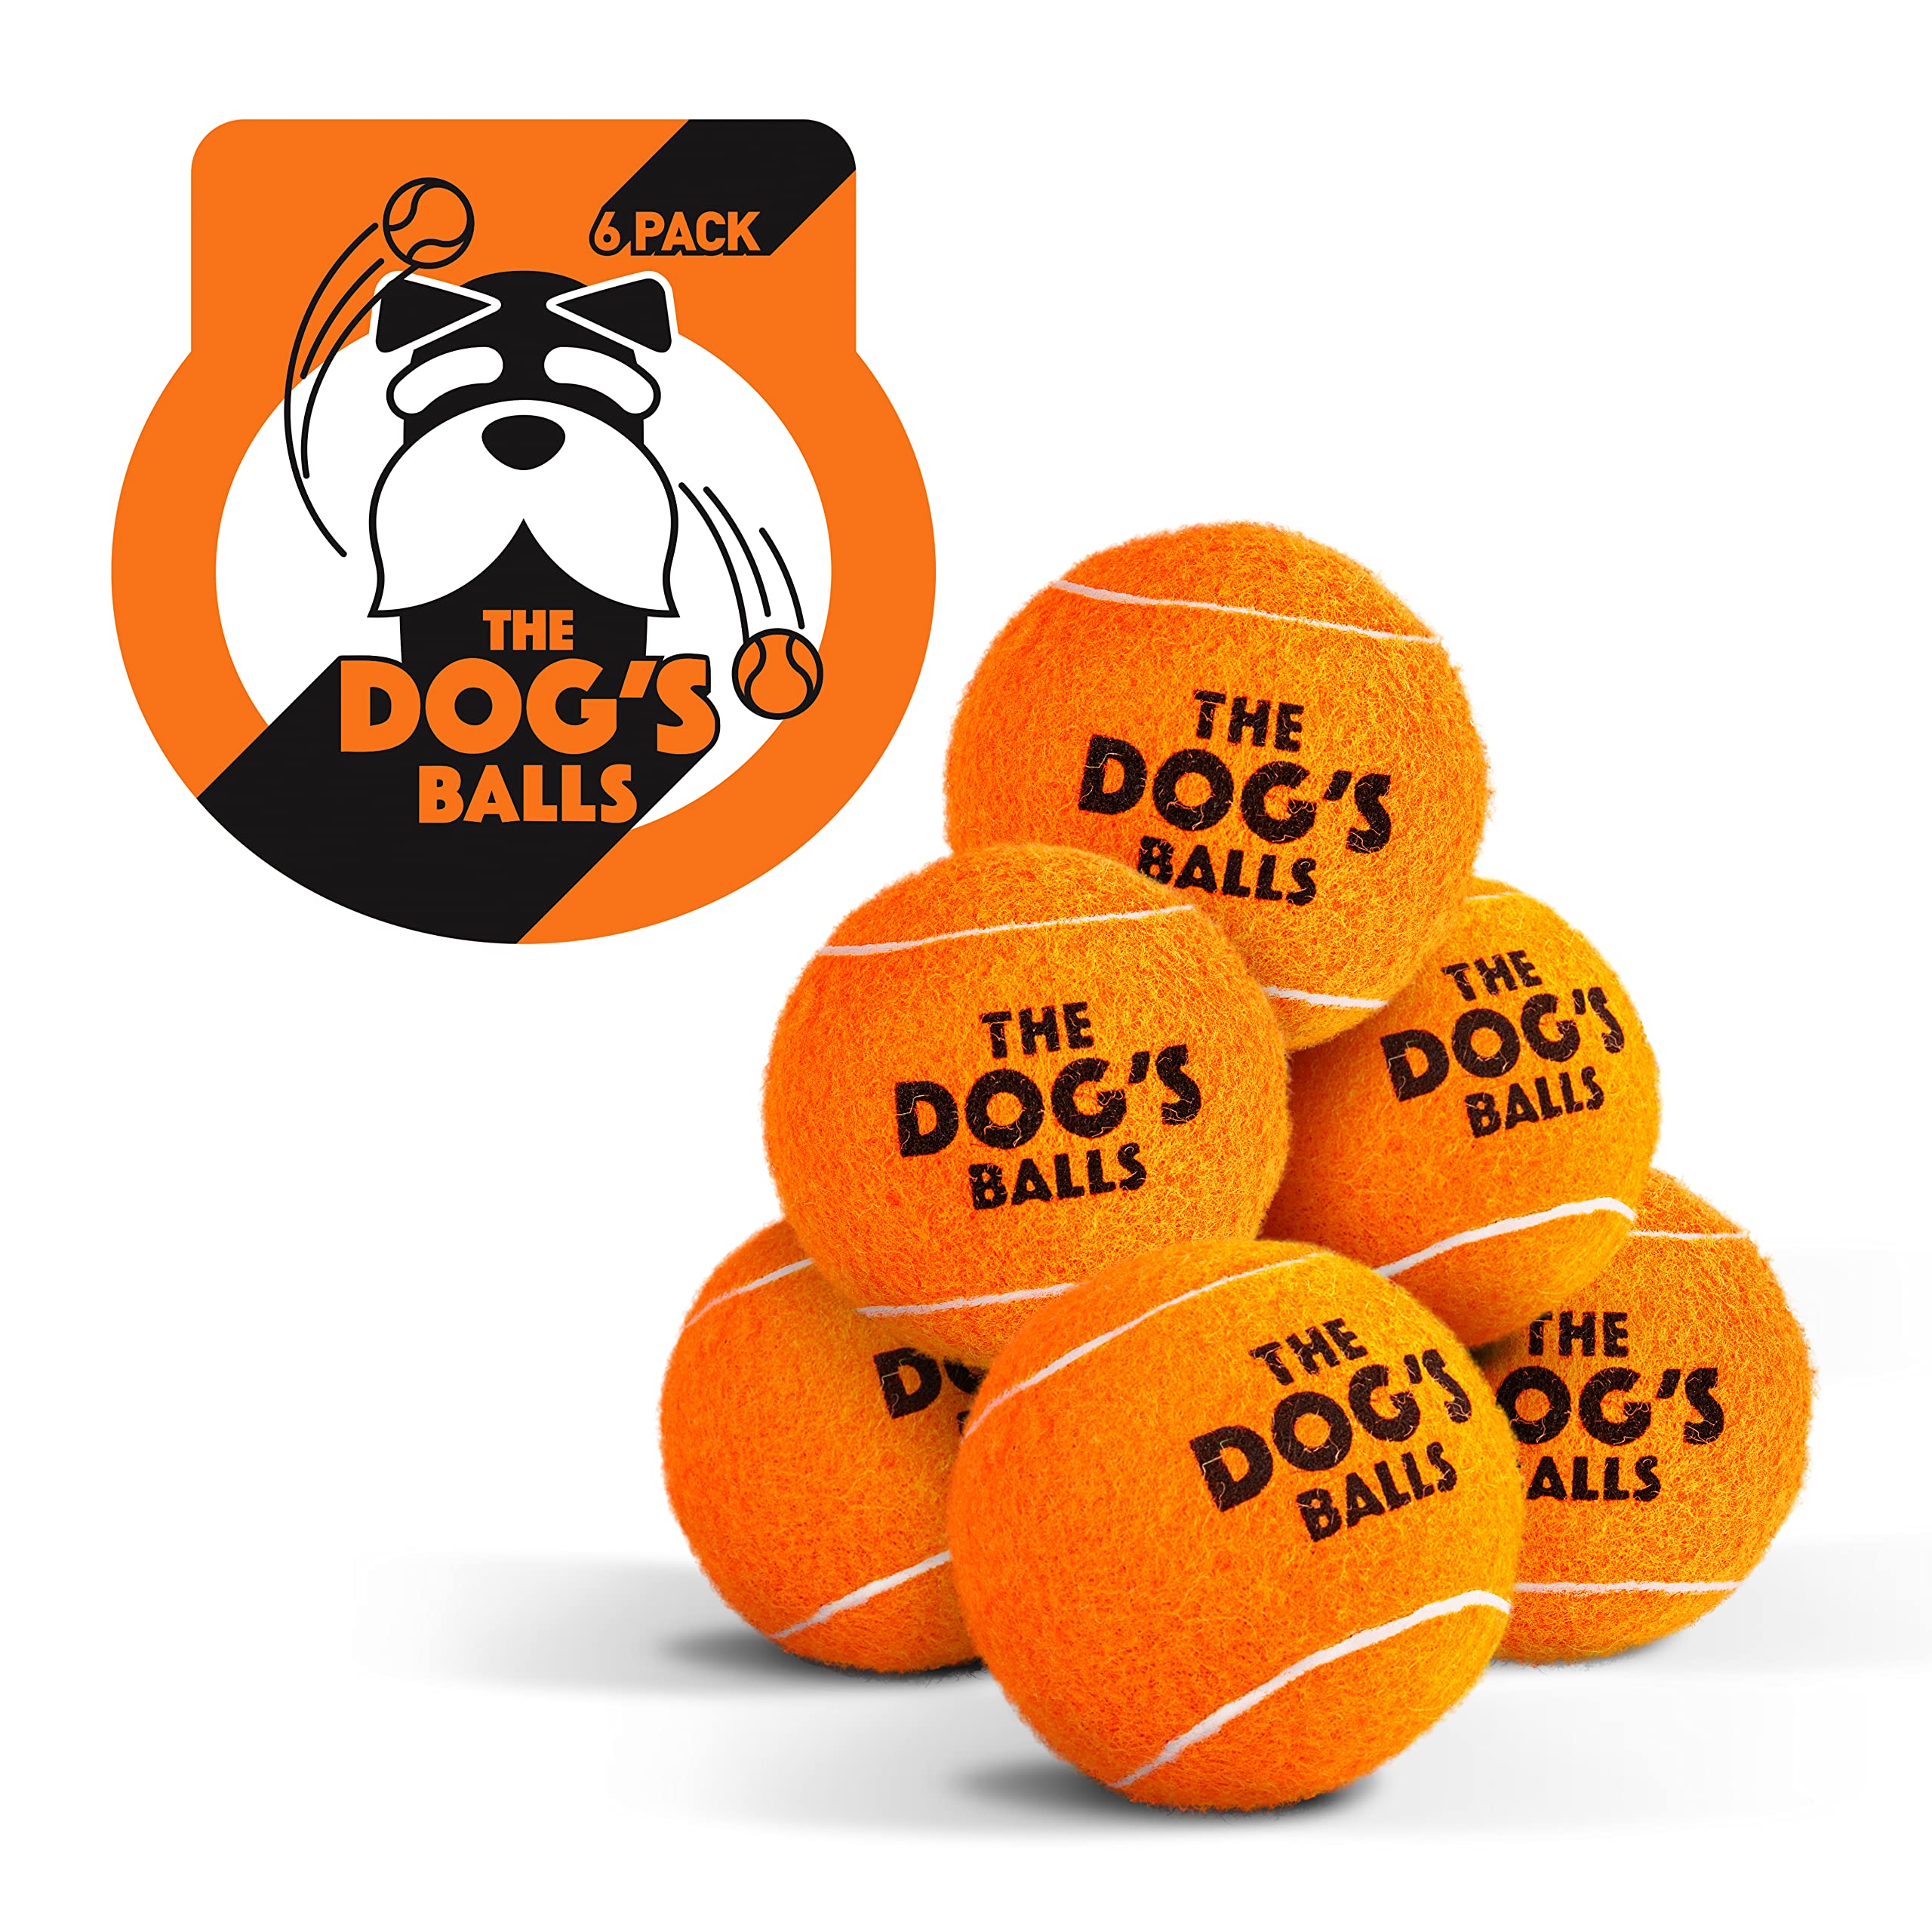 The Dog's Balls The Little Dog's Balls, Dog Tennis Balls, 6-Pack Orange, 1.9 Inches Diameter Dog Toy, Strong Dog & Puppy Ball for Training, Play